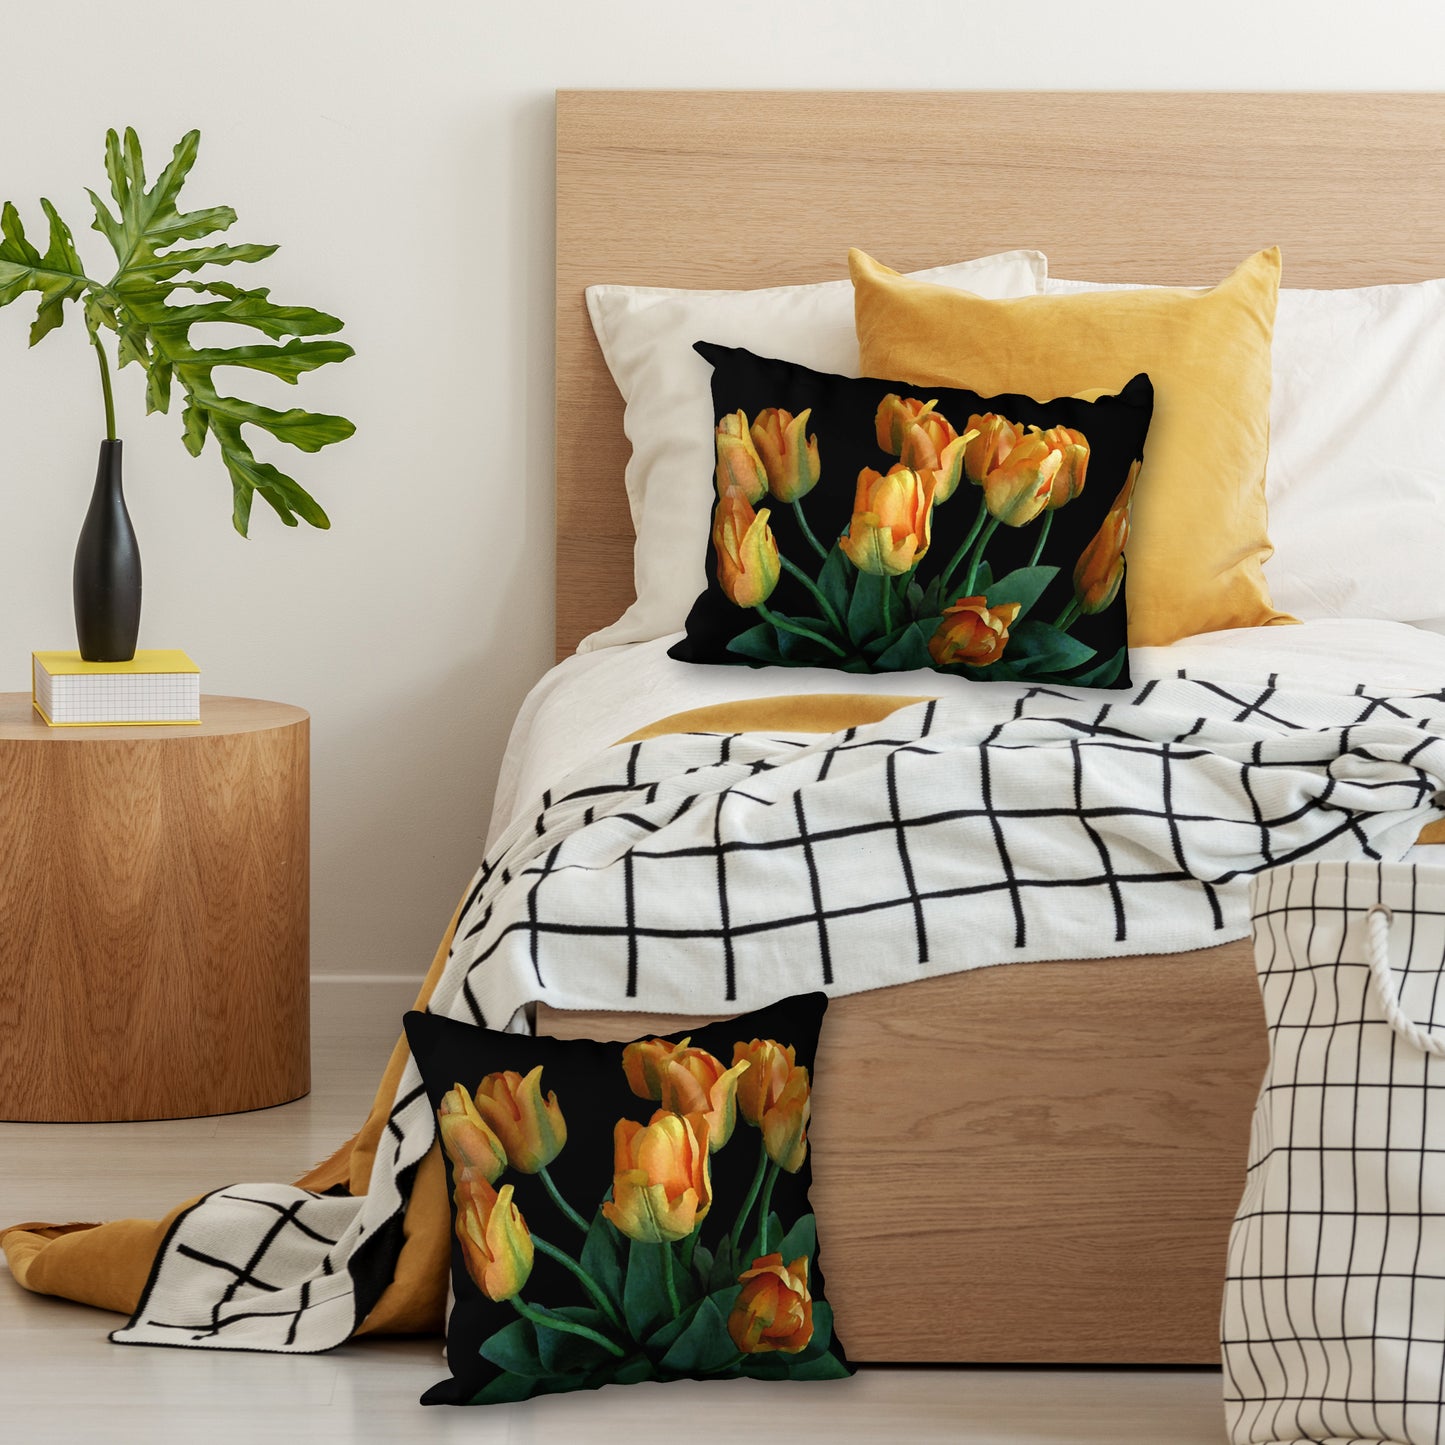 Set of 2 Tulips on Black Designer Pillows, 20"x14" and 18"x18"